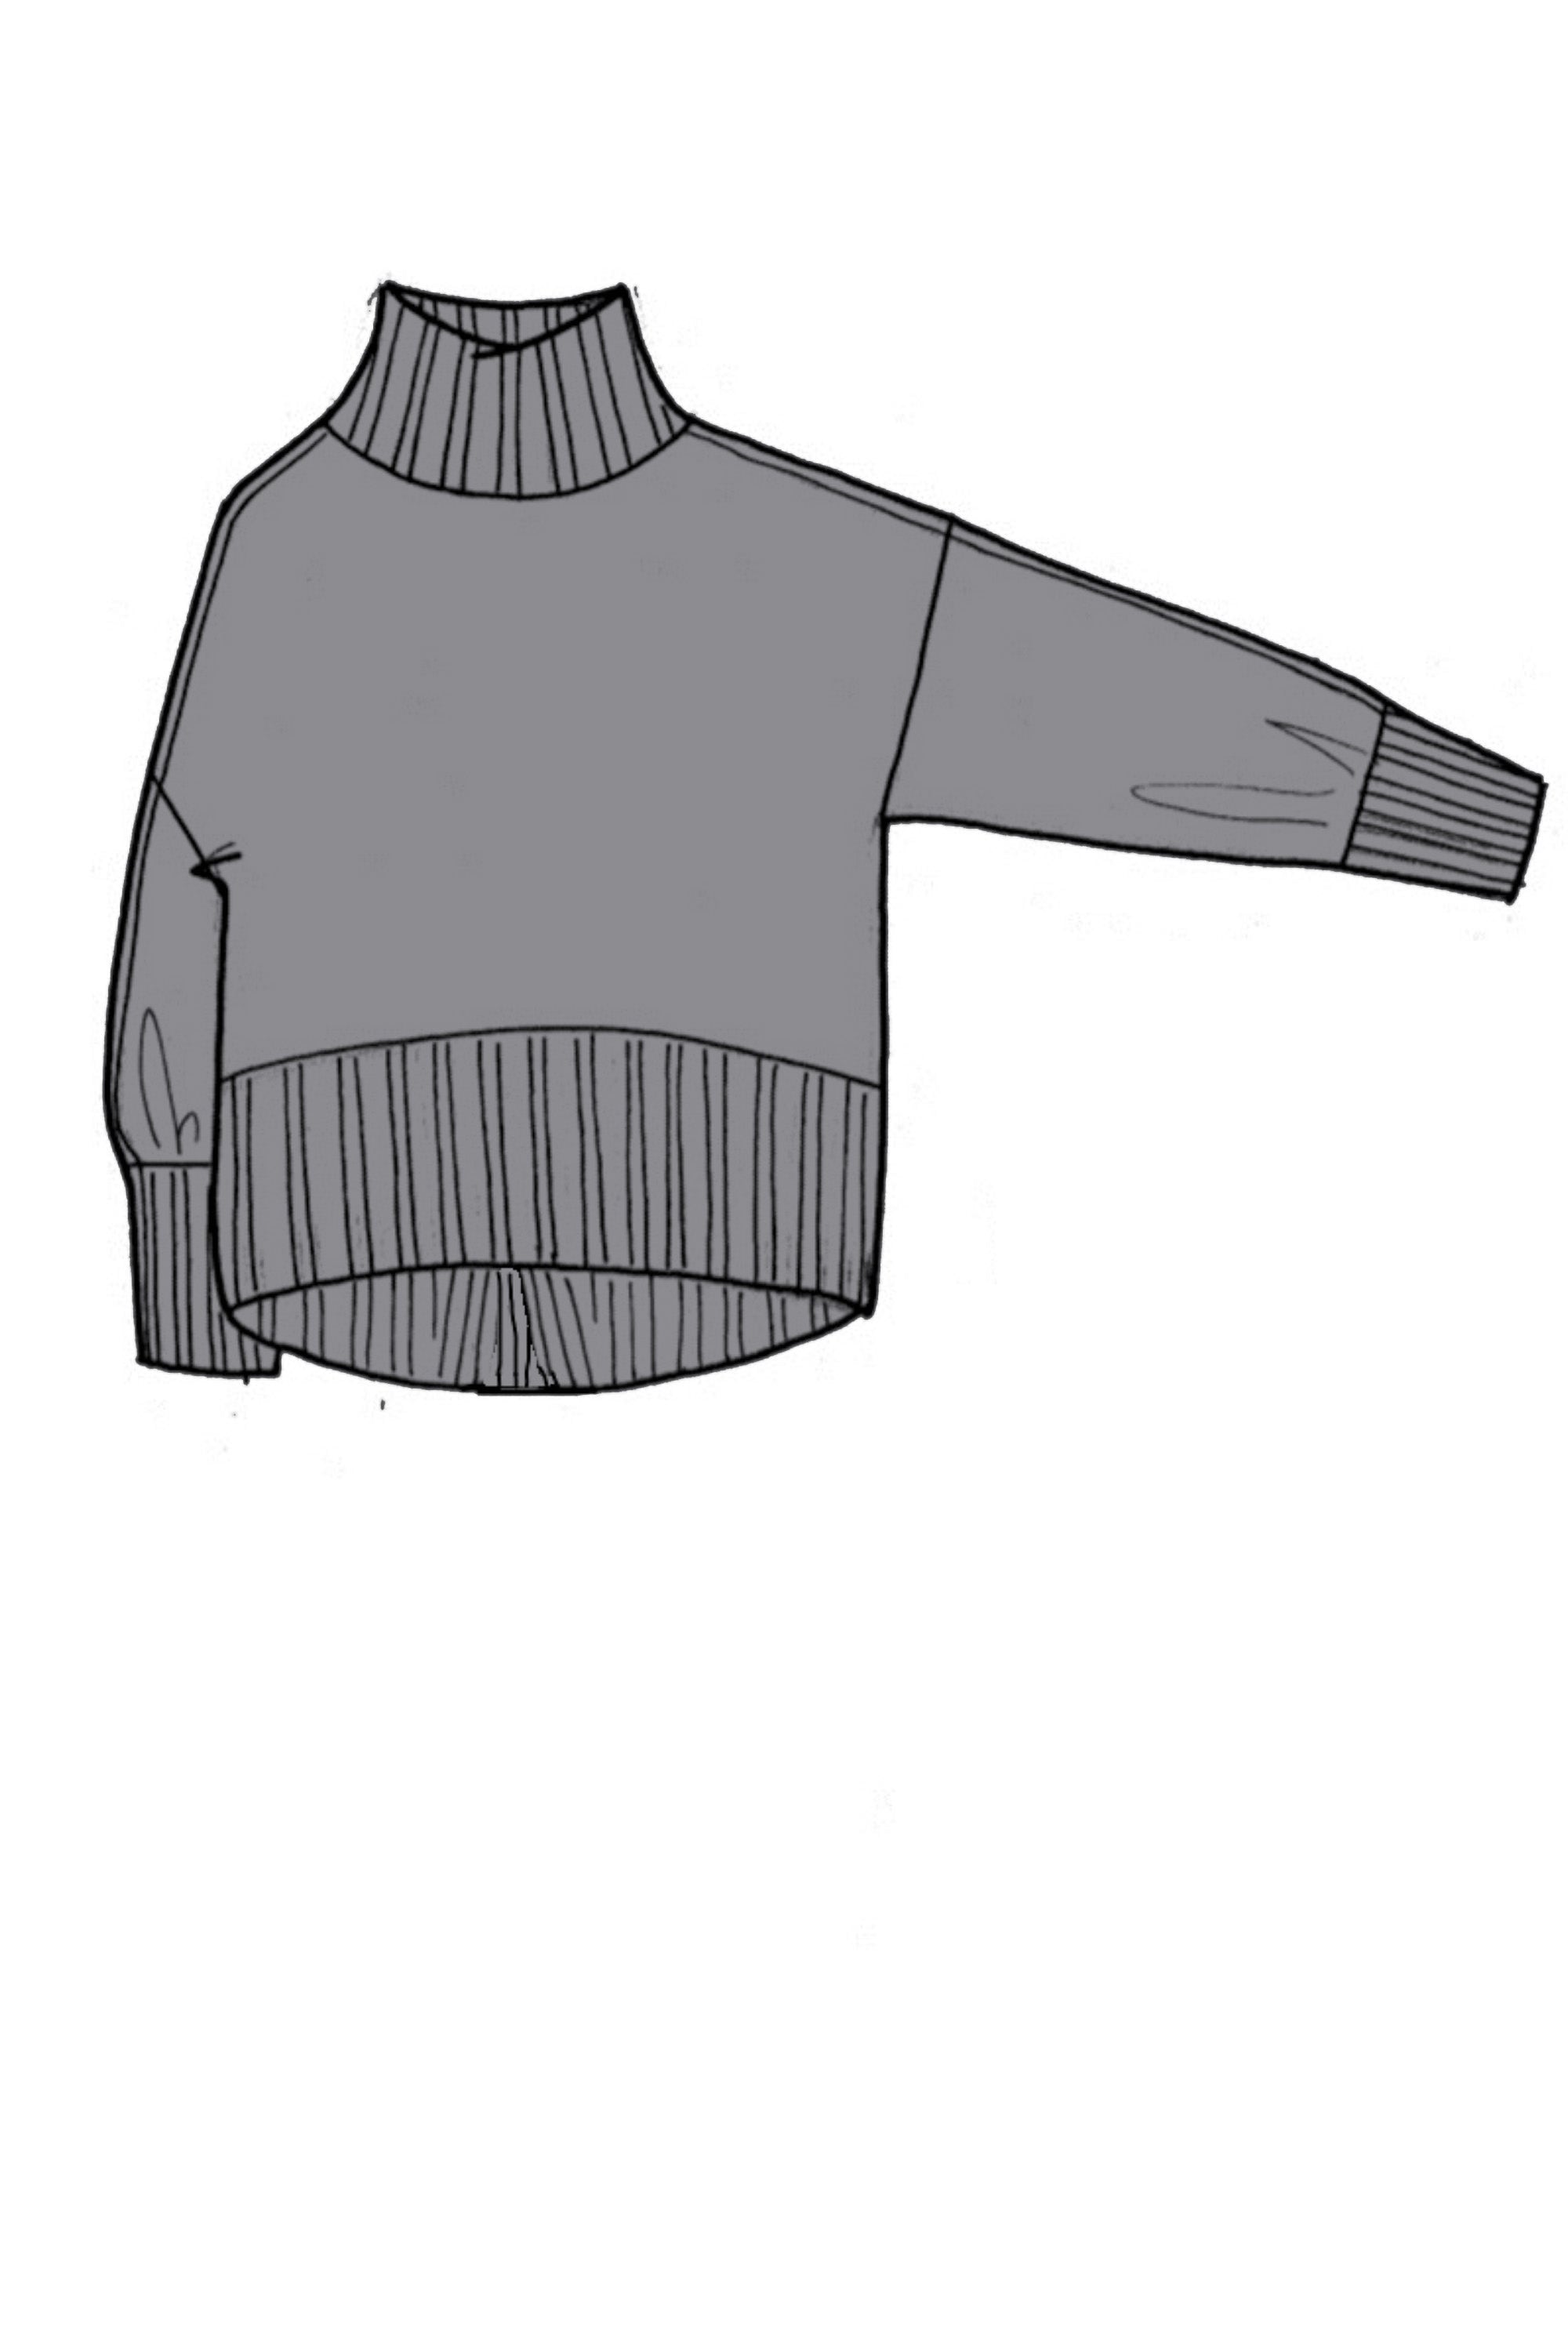 Oversized Cashmere Polo Neck Sweater - Made to Order